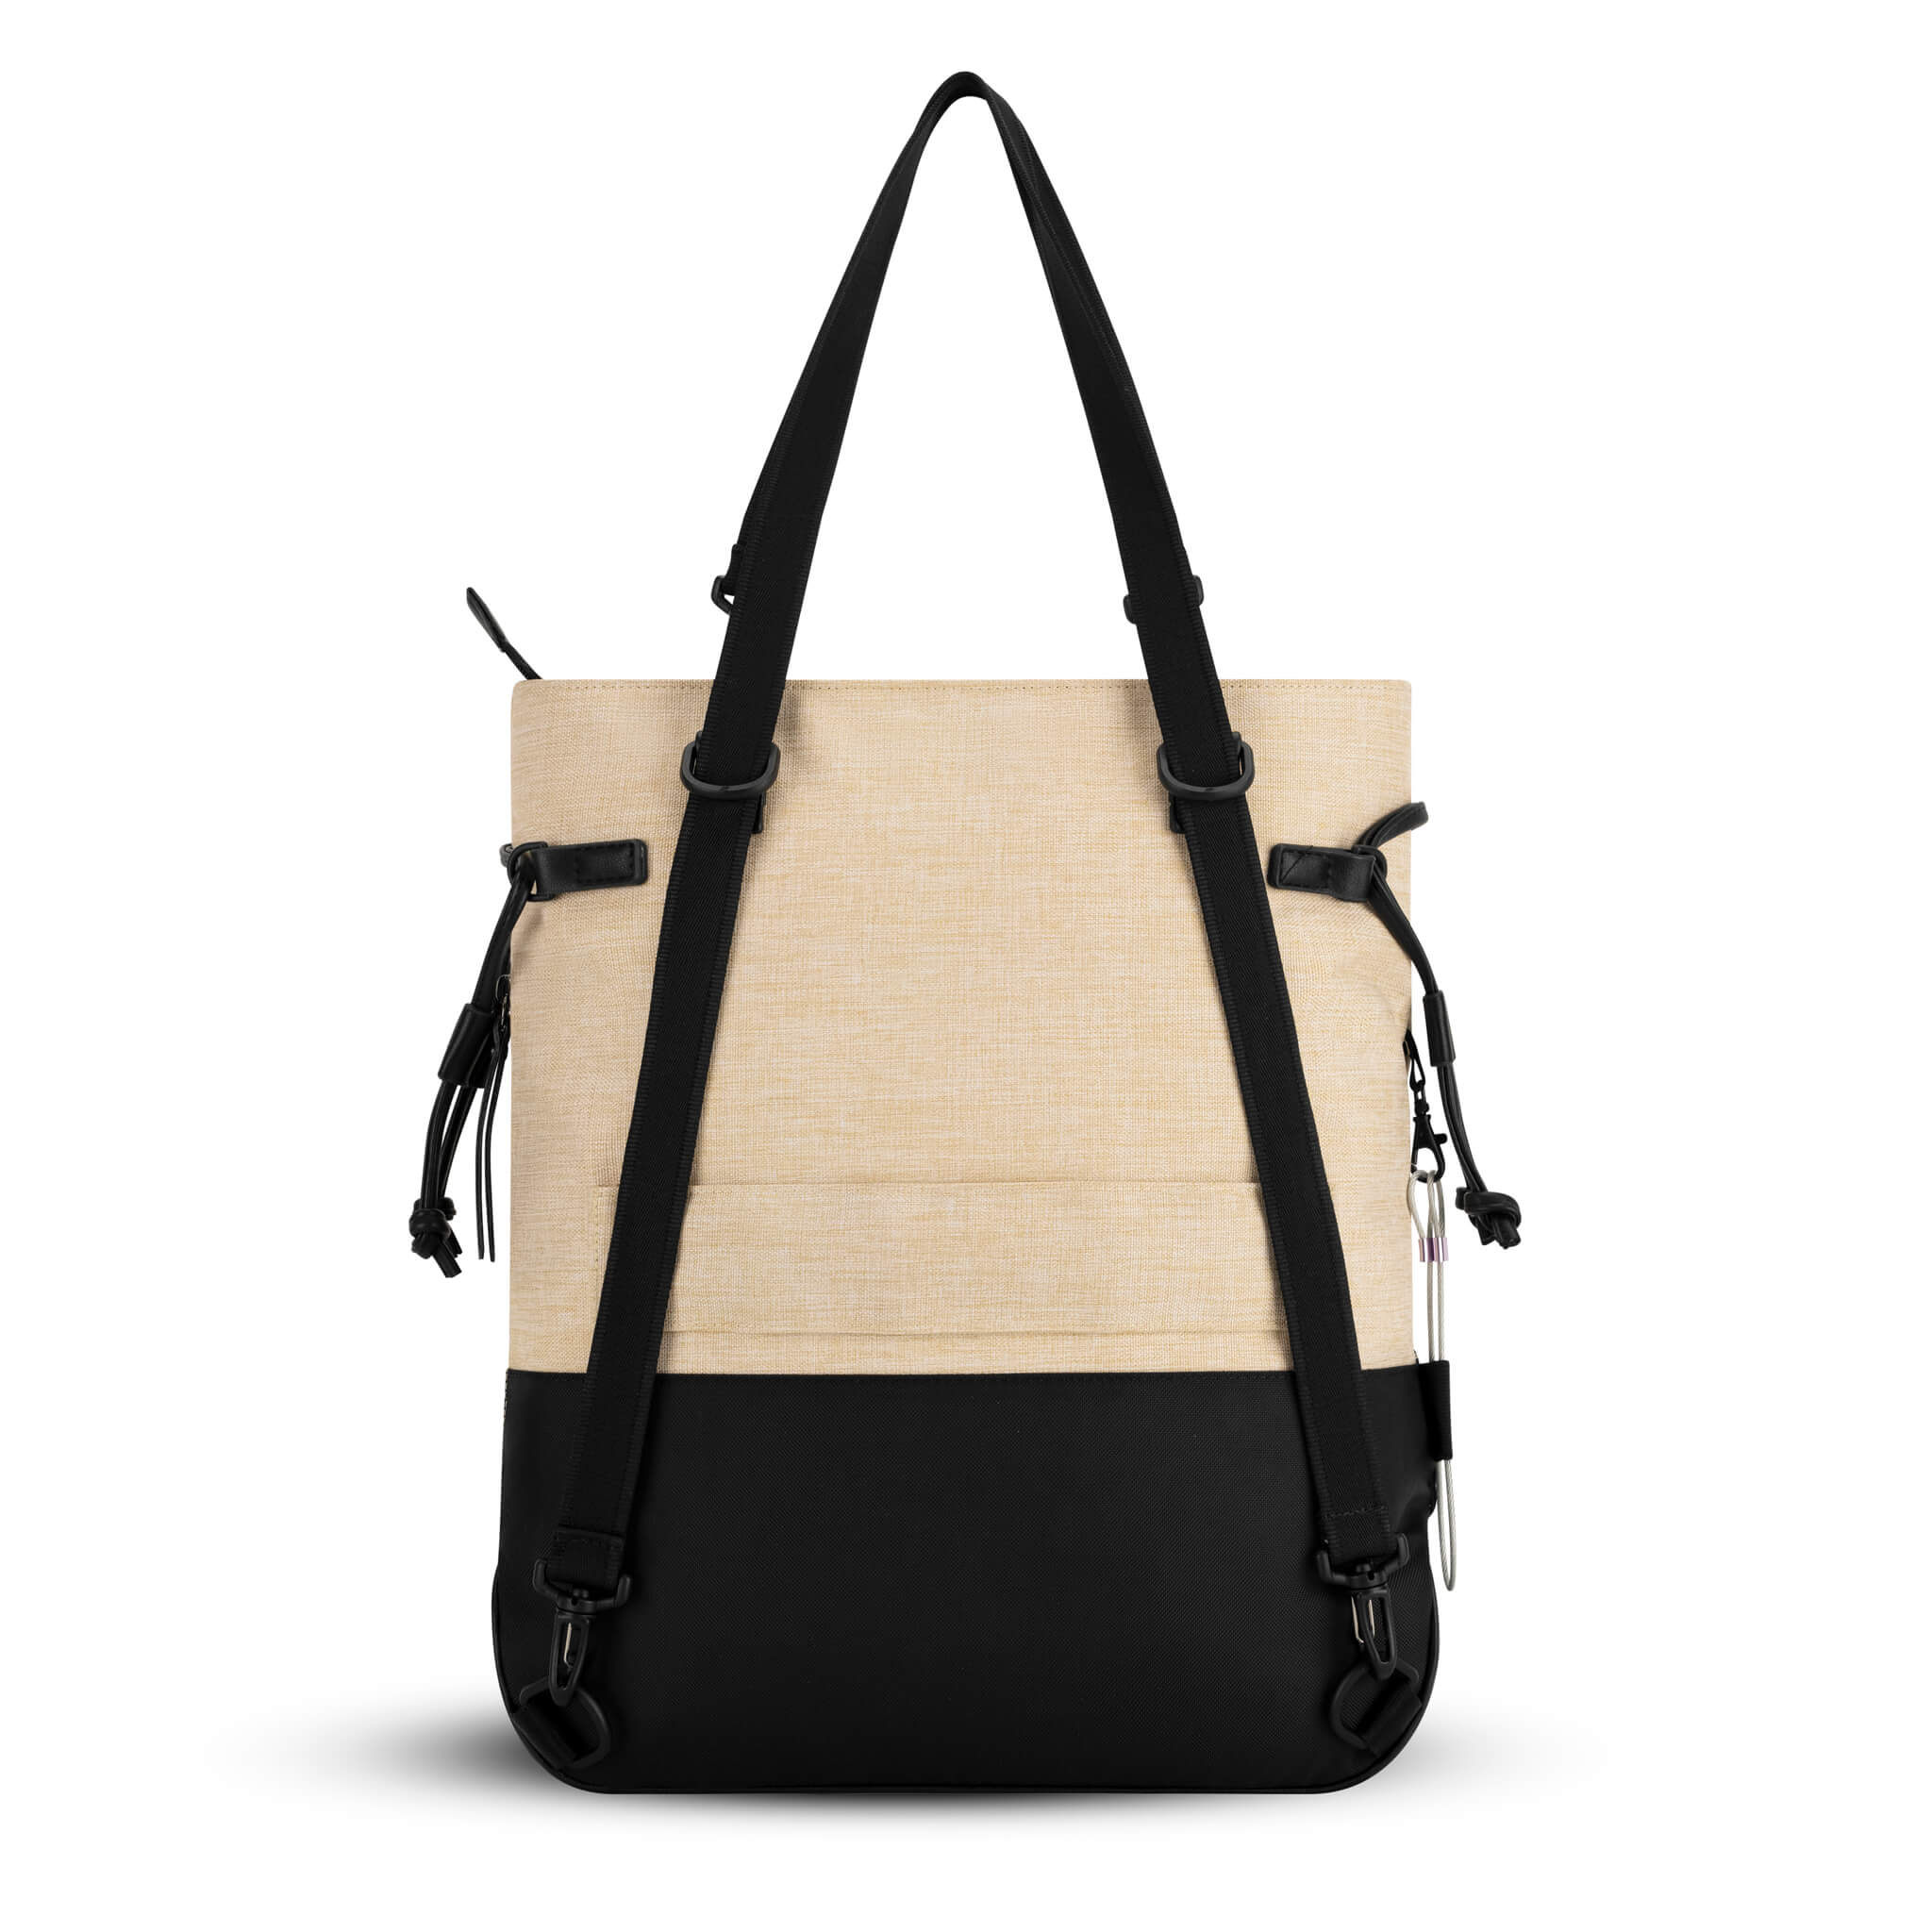 Back view of the Sherpani Anti-Theft tote backpack, the Tempest in Straw. The convertible bag includes RFID protection, locking zipper pockets, adjustable straps, and a trolley sleeve. 